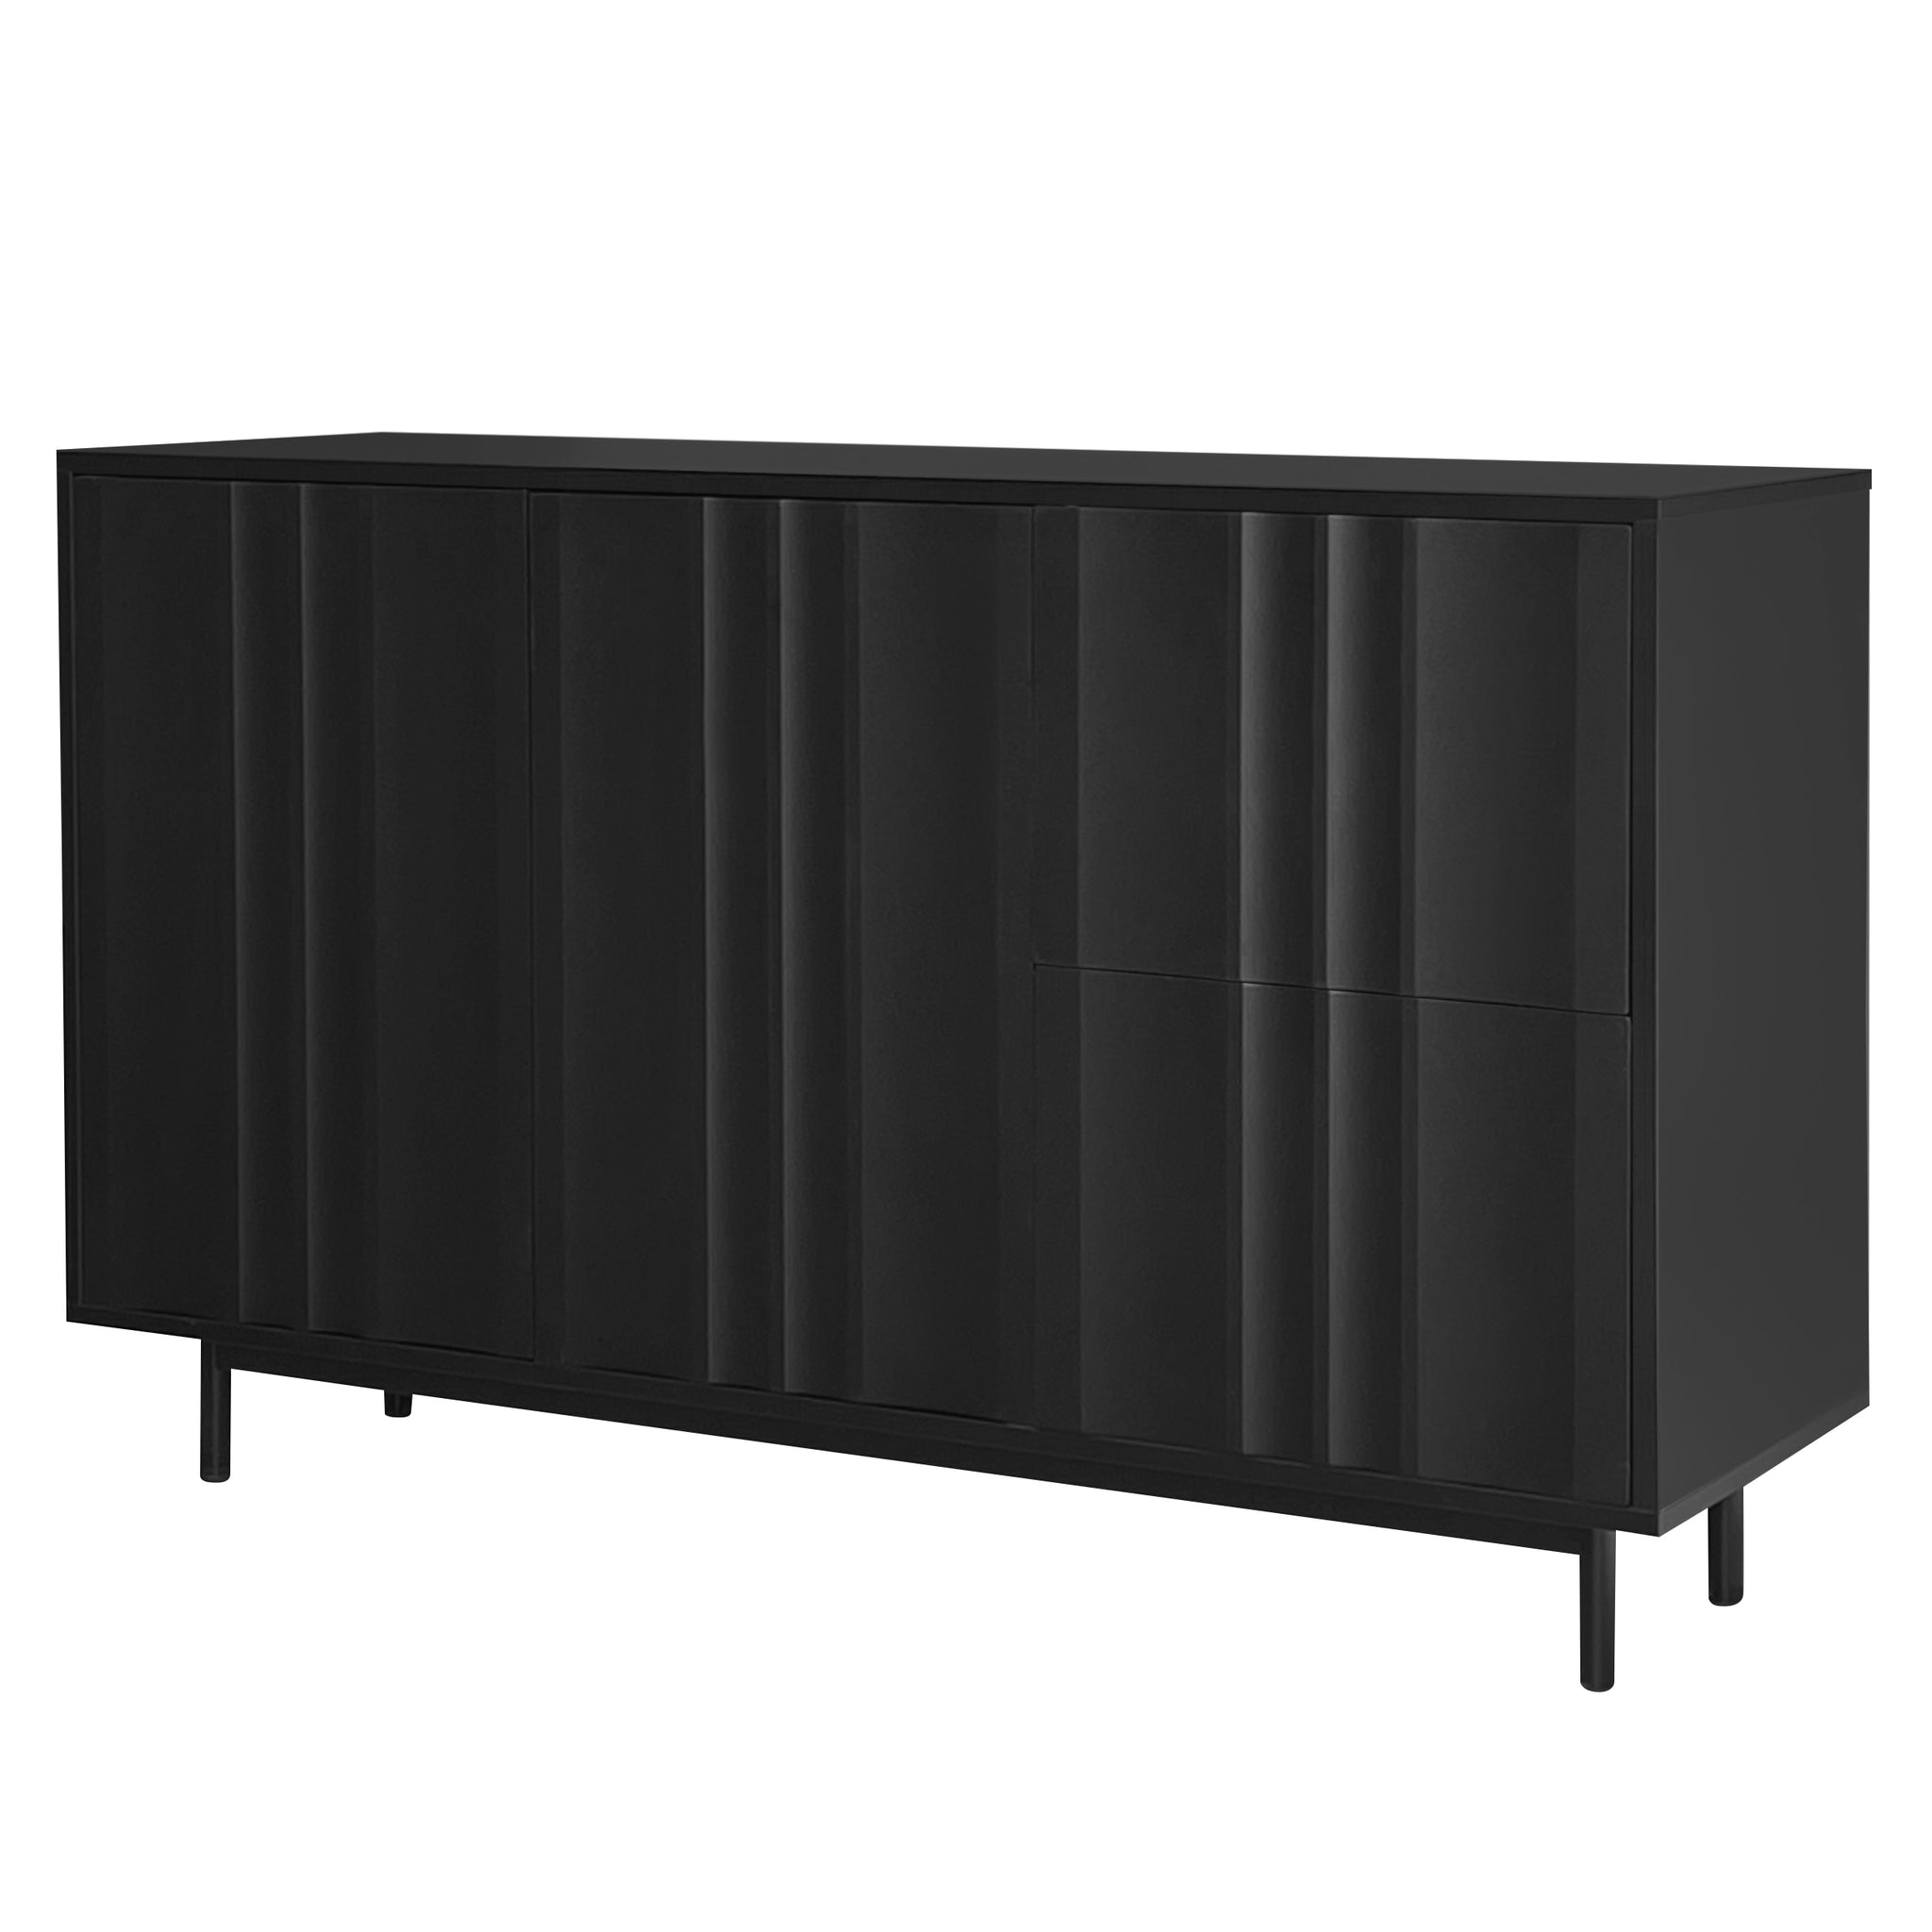 U STYLE Wave Pattern Storage Cabinet with 2 Doors and black-mdf